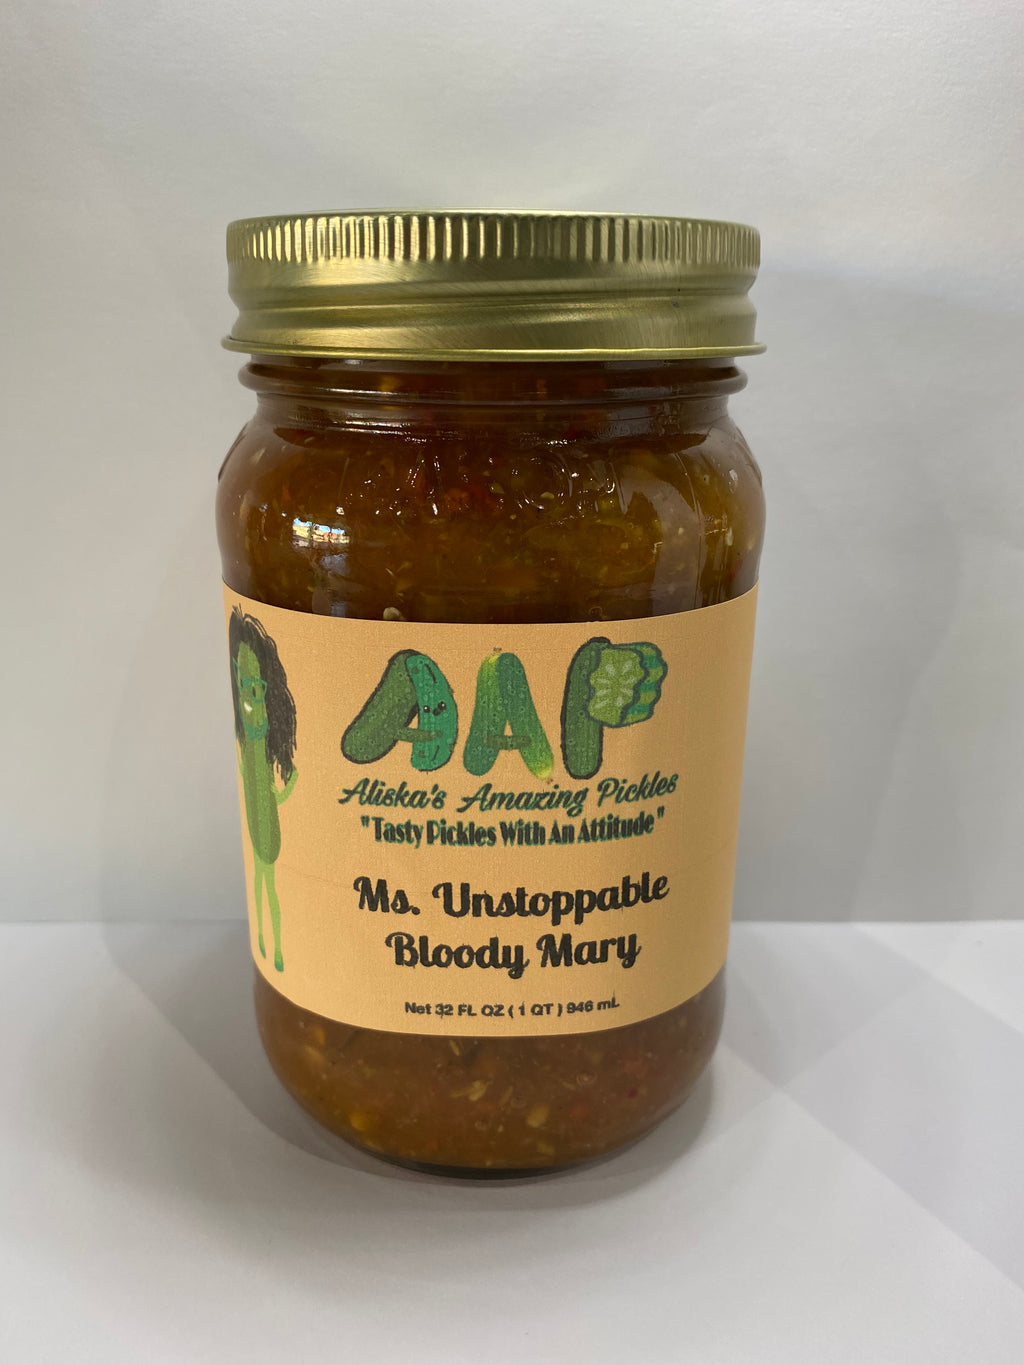 Ms. Unstoppable Bloody Mary Relish